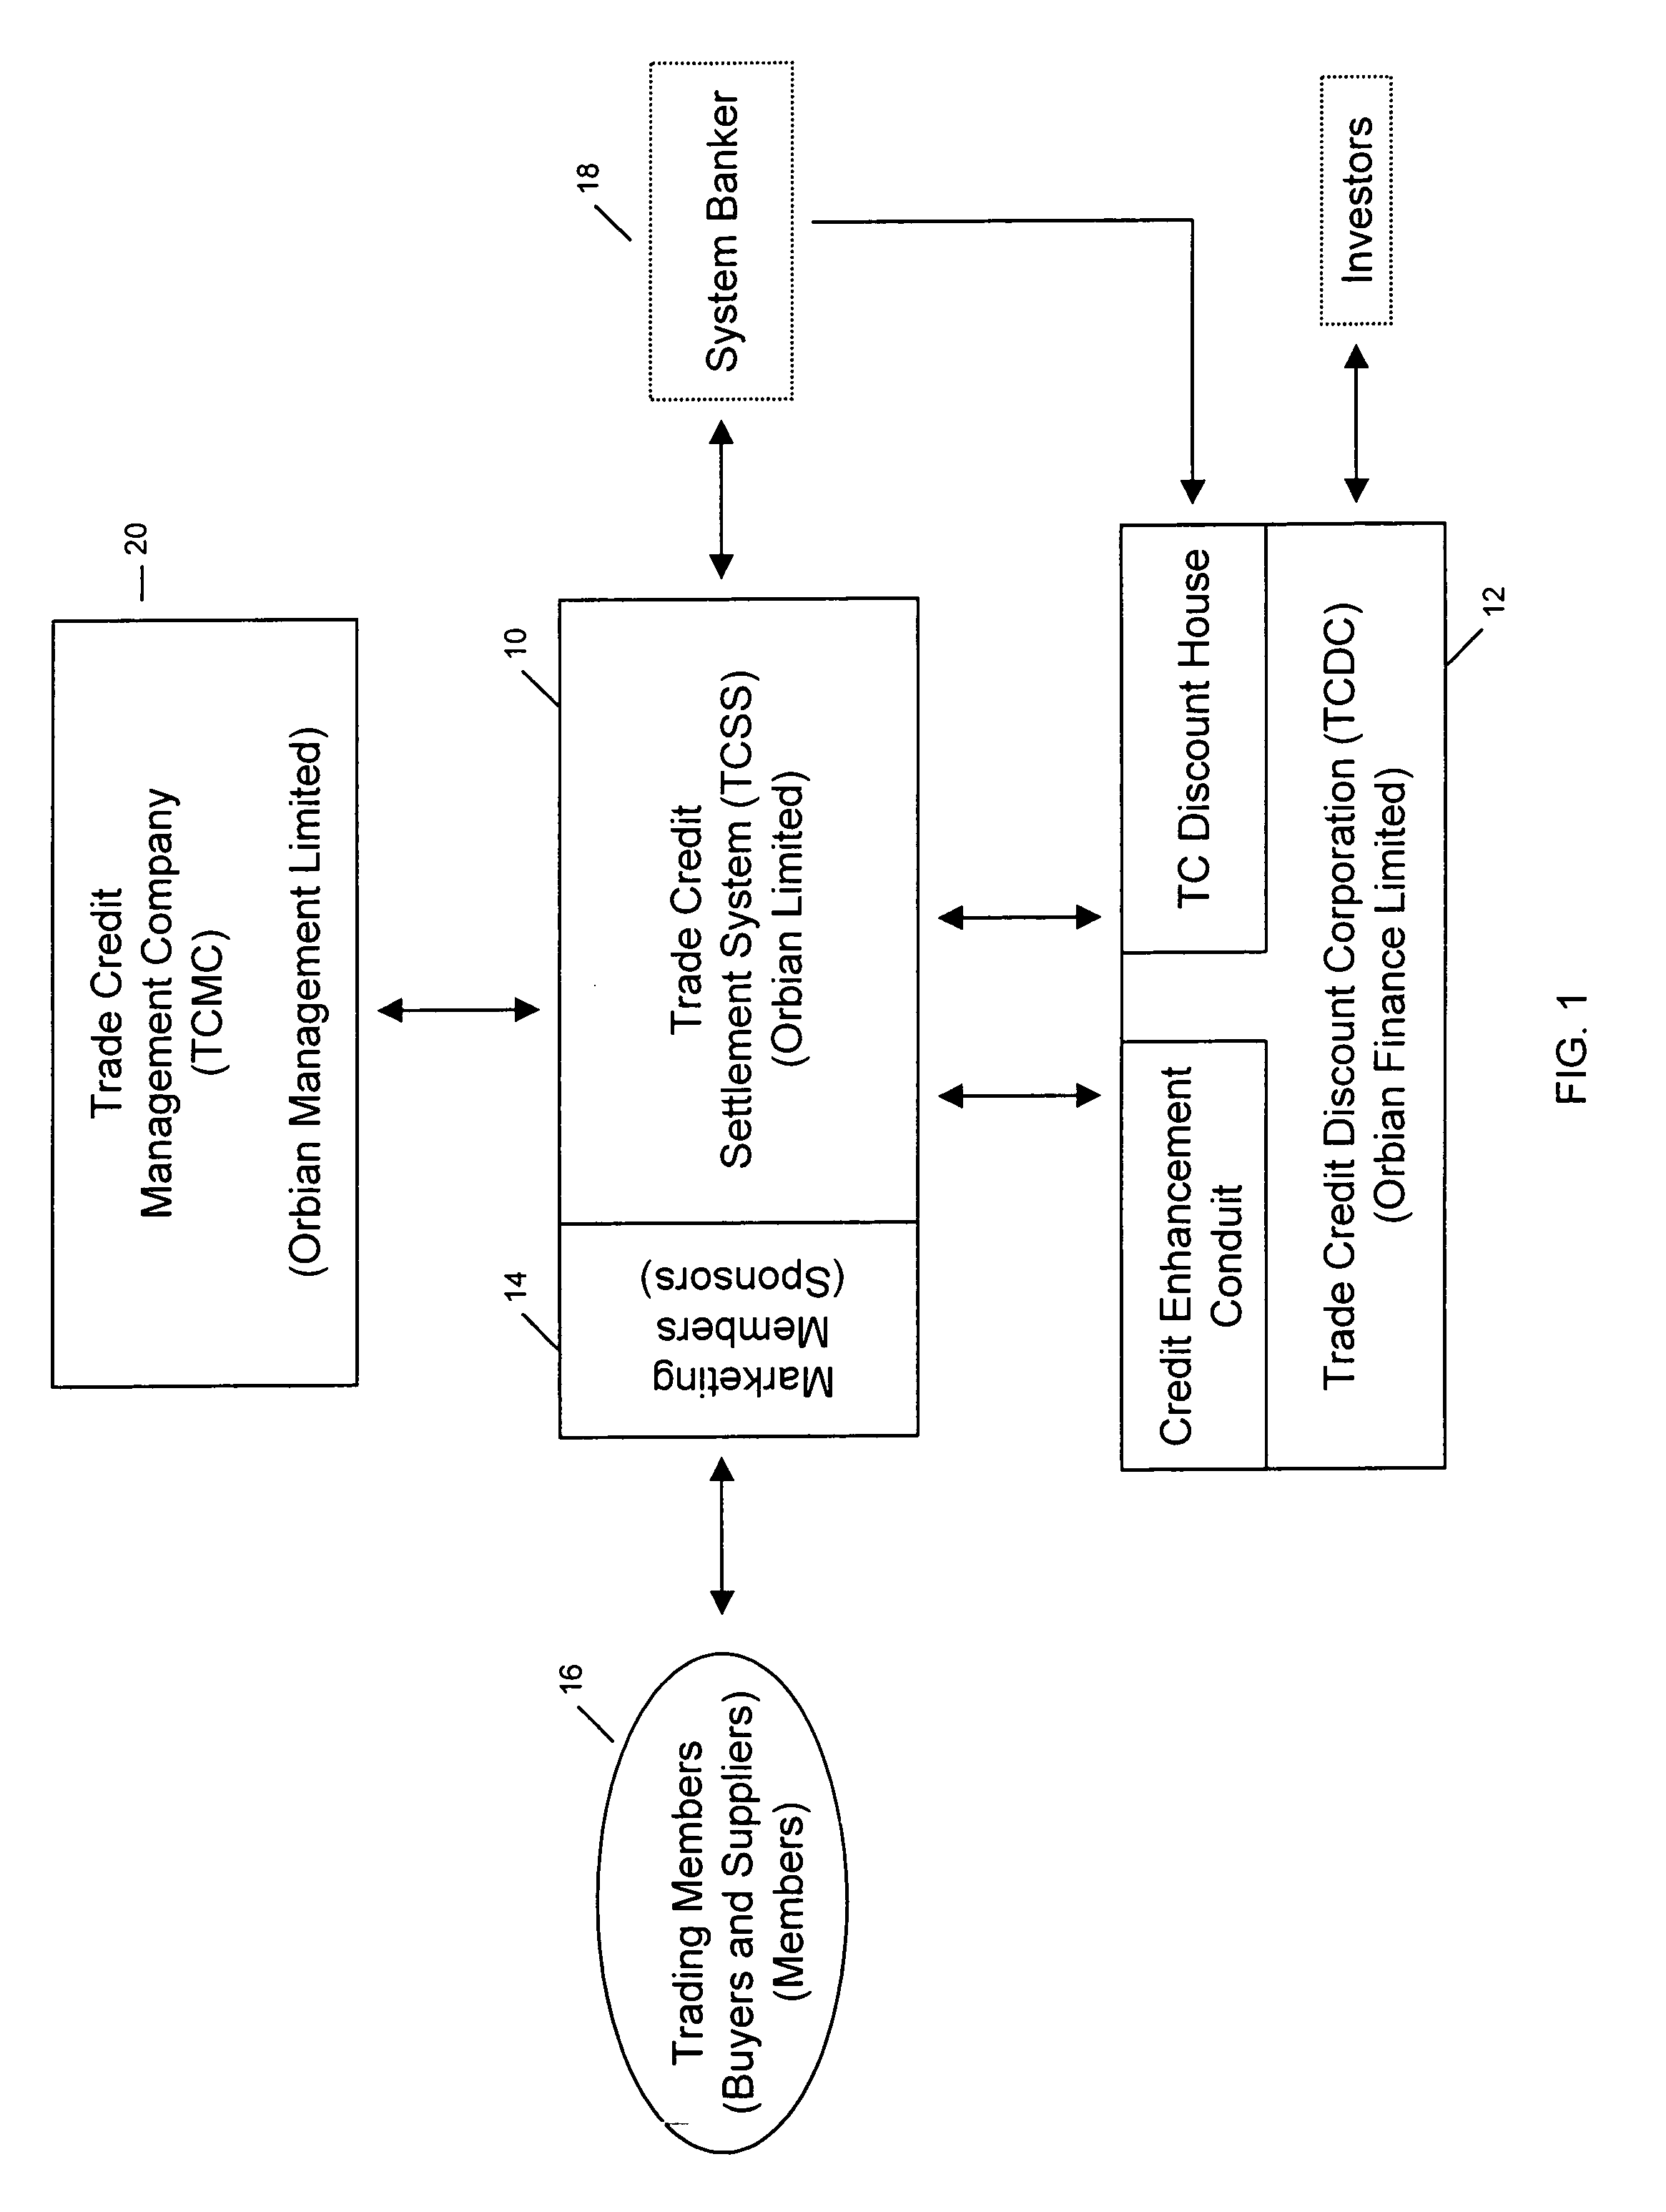 System and method of transaction settlement using trade credit